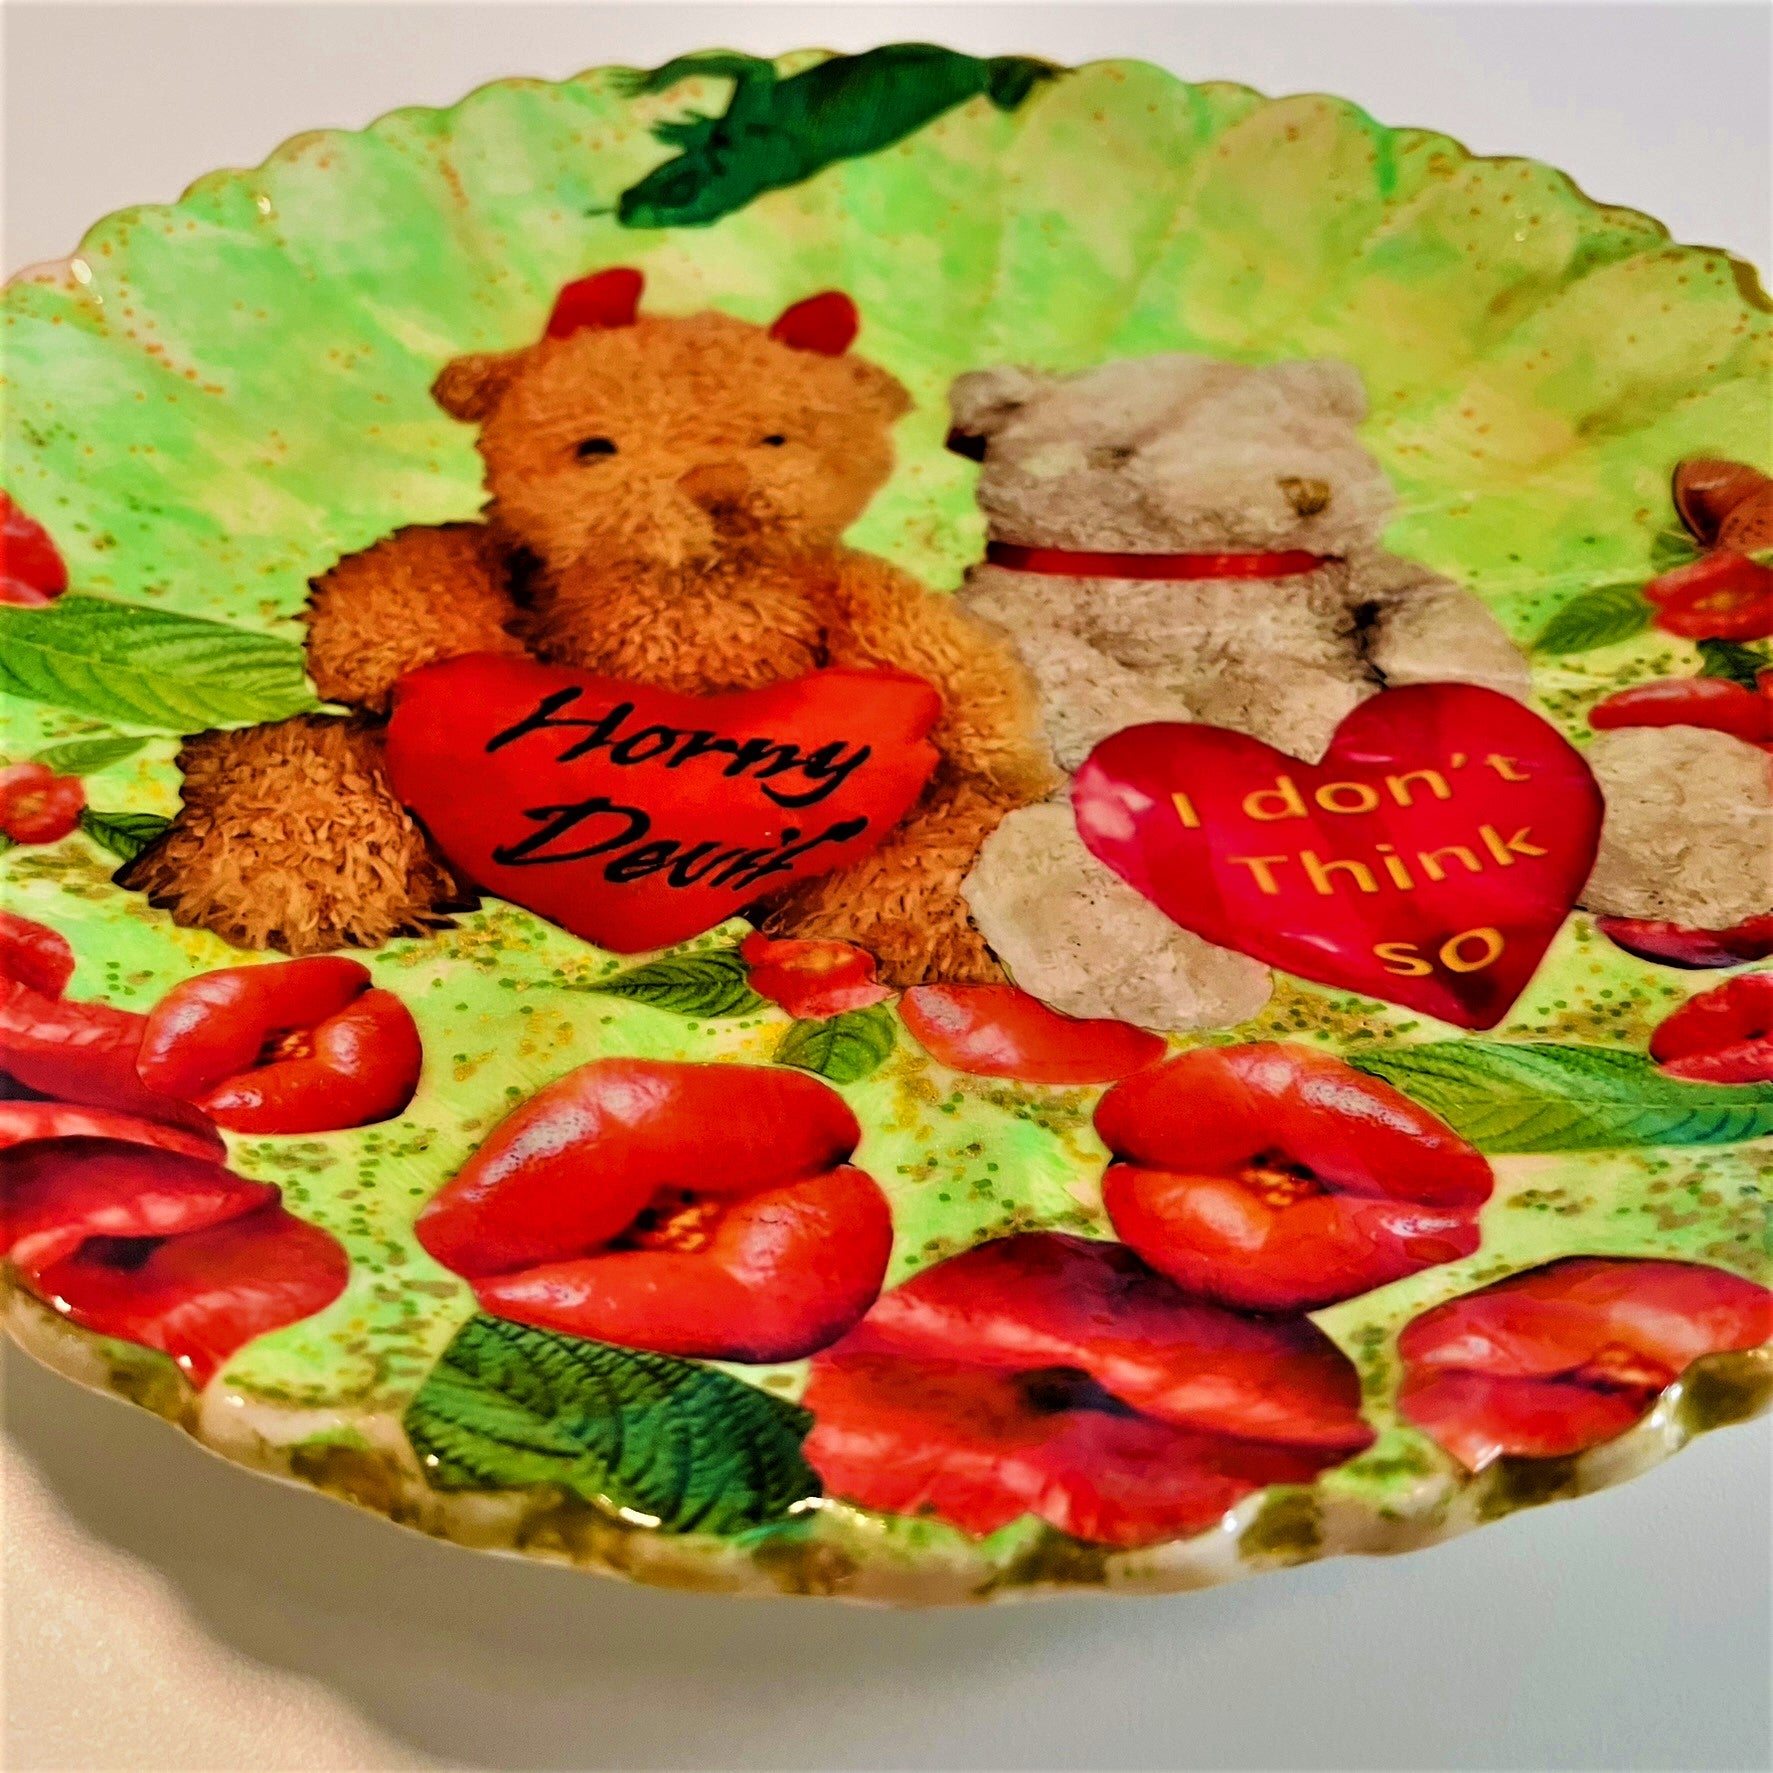 "Horny Devil. I Don't Think So" Wall Plate by House of Frisson, featuring a collage of two teddy bears holding hearts with messages, among lip-shaped flowers, on a green background. Closeup detail showing the lip-shaped flowers.